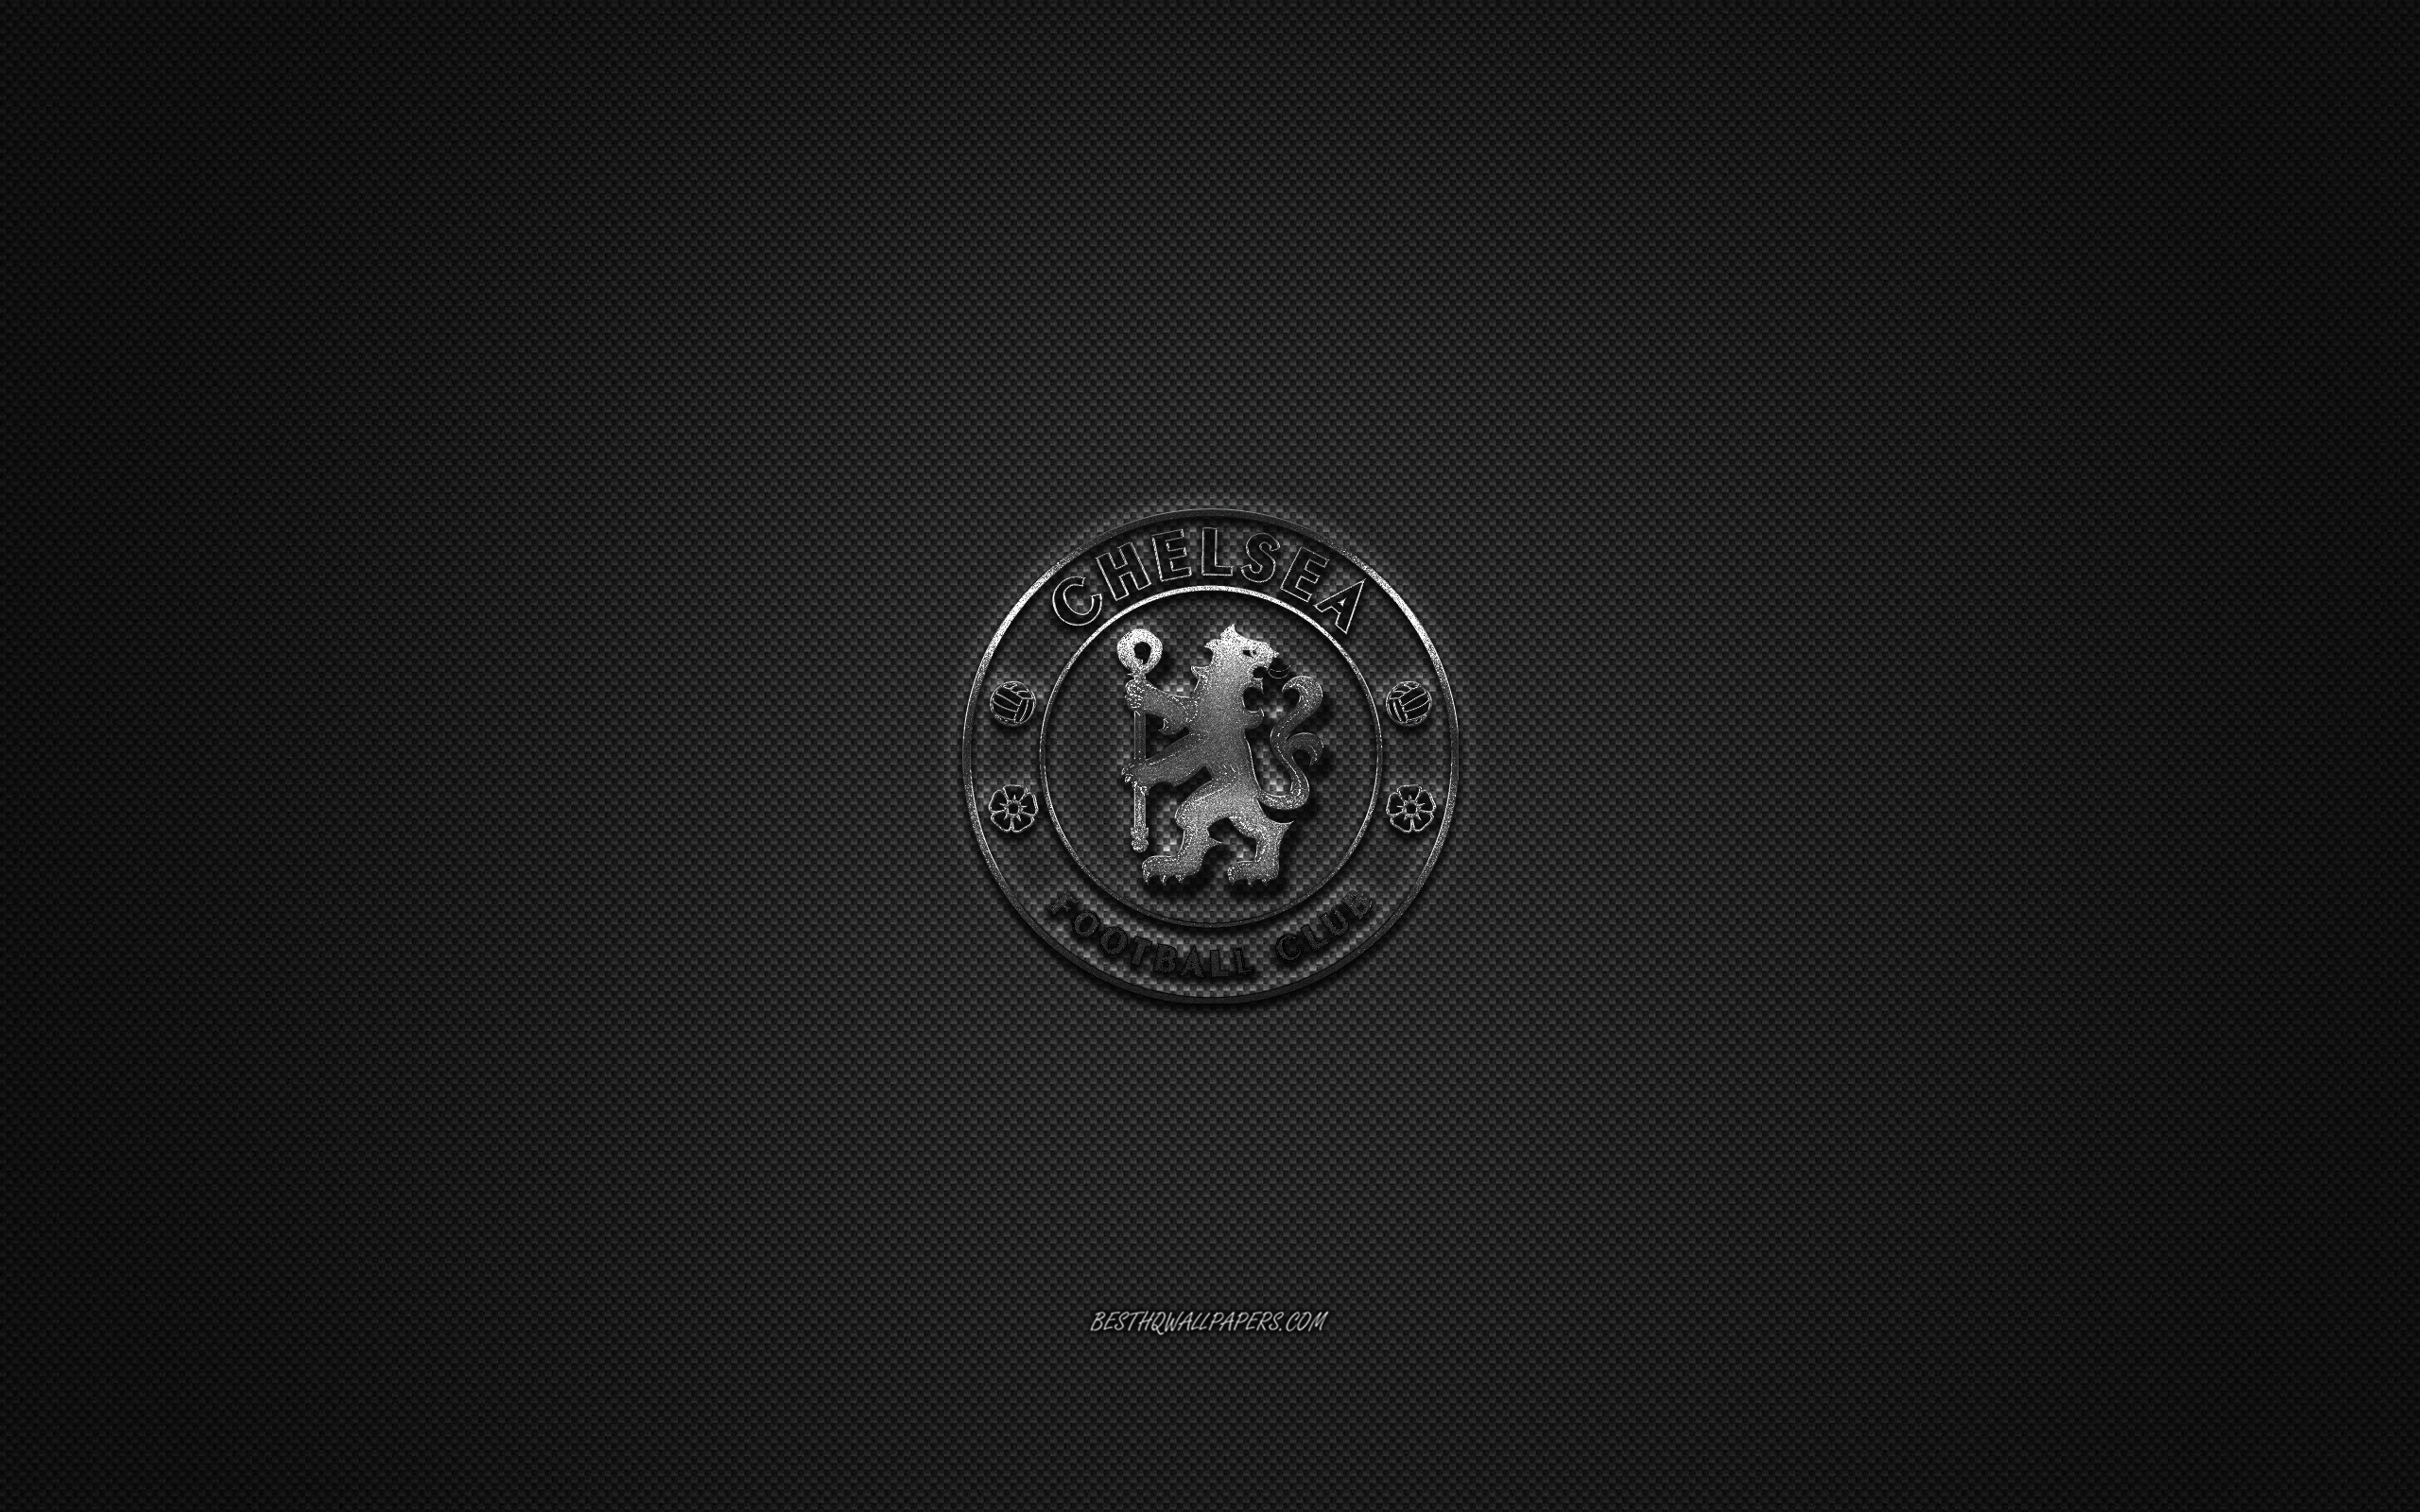 Download wallpaper Chelsea FC, English football club, Premier League, silver logo, gray carbon fiber background, football, London, England, Chelsea FC logo for desktop with resolution 2560x1600. High Quality HD picture wallpaper